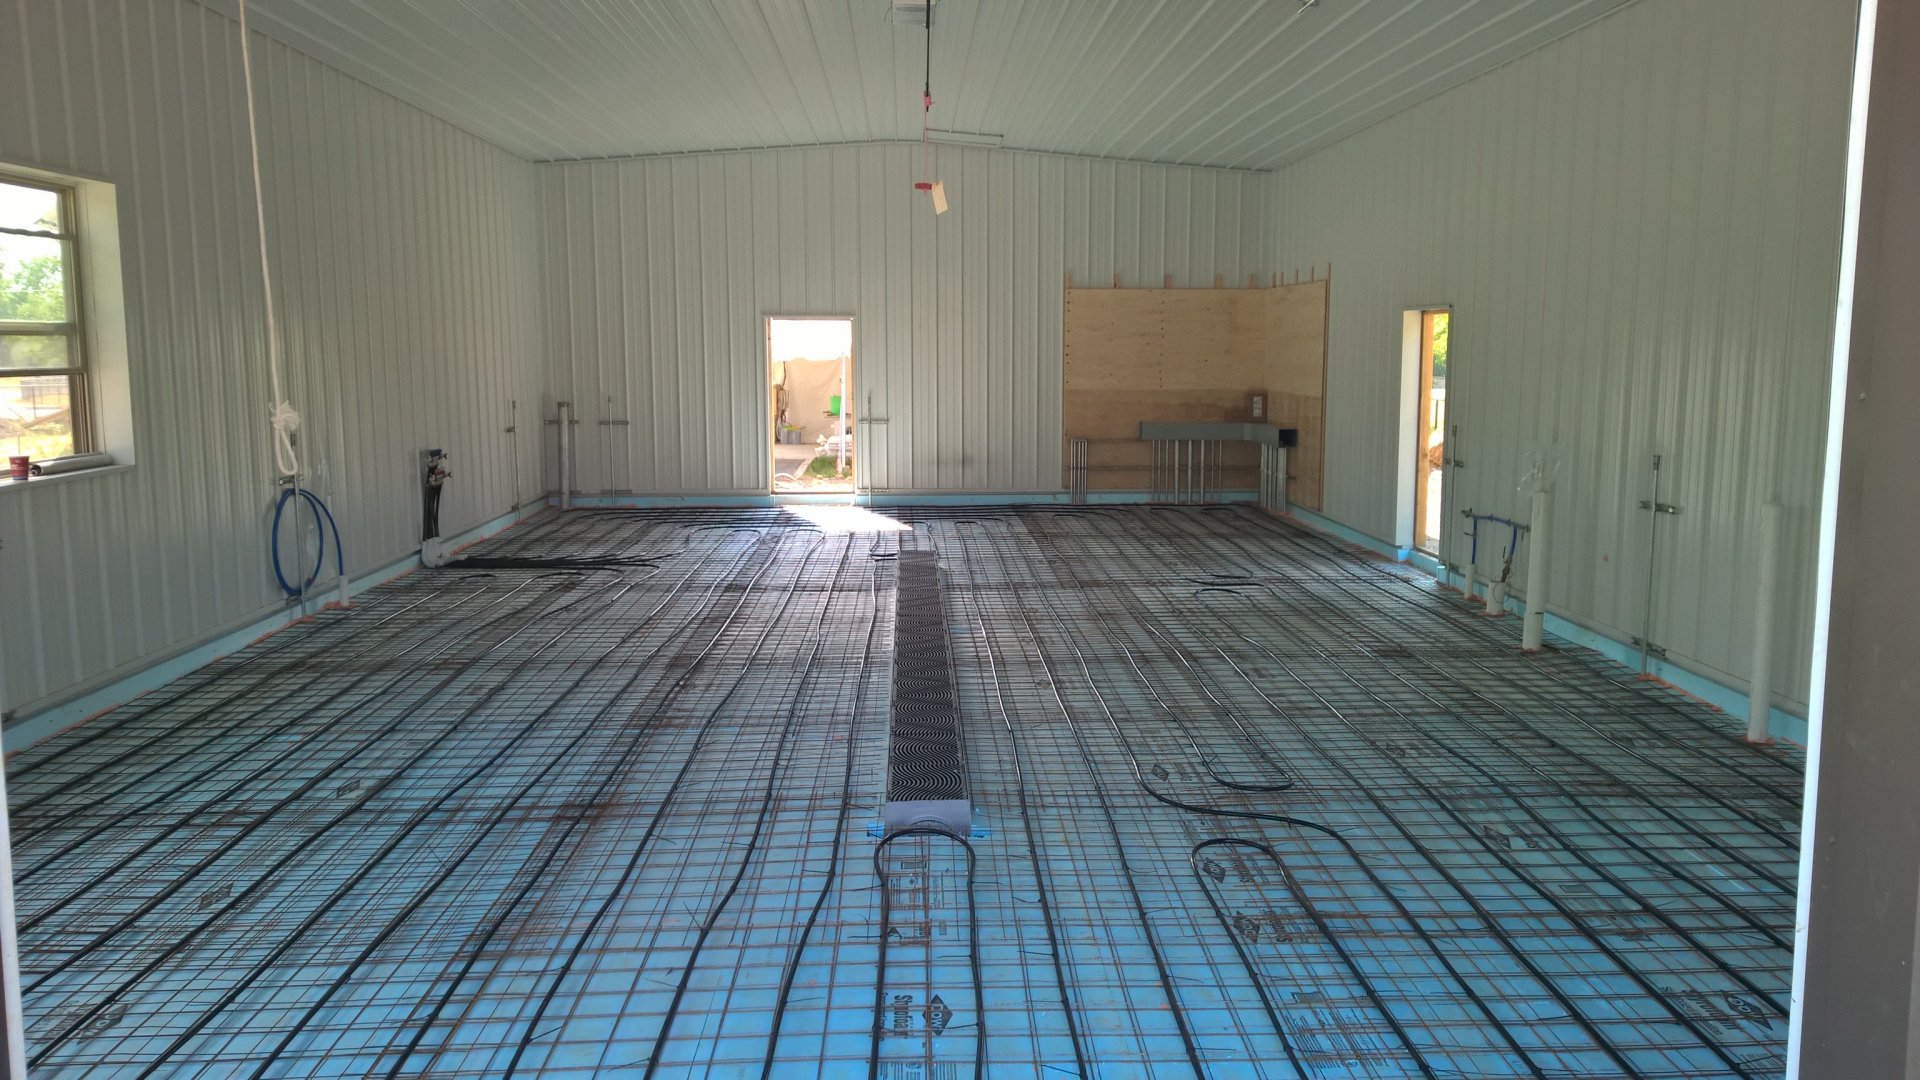 The tubing system for the radiant heat.